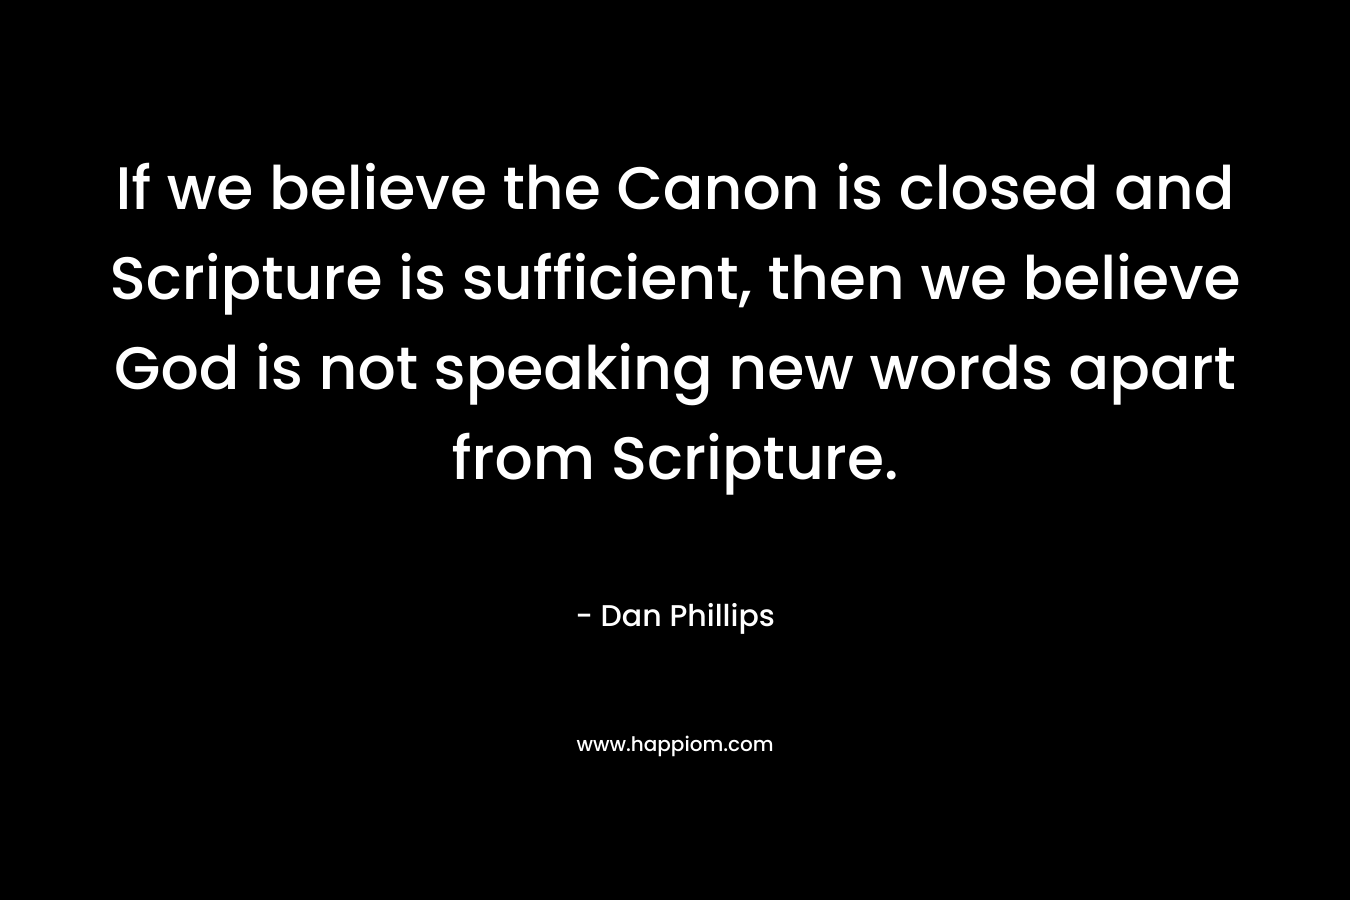 If we believe the Canon is closed and Scripture is sufficient, then we believe God is not speaking new words apart from Scripture.